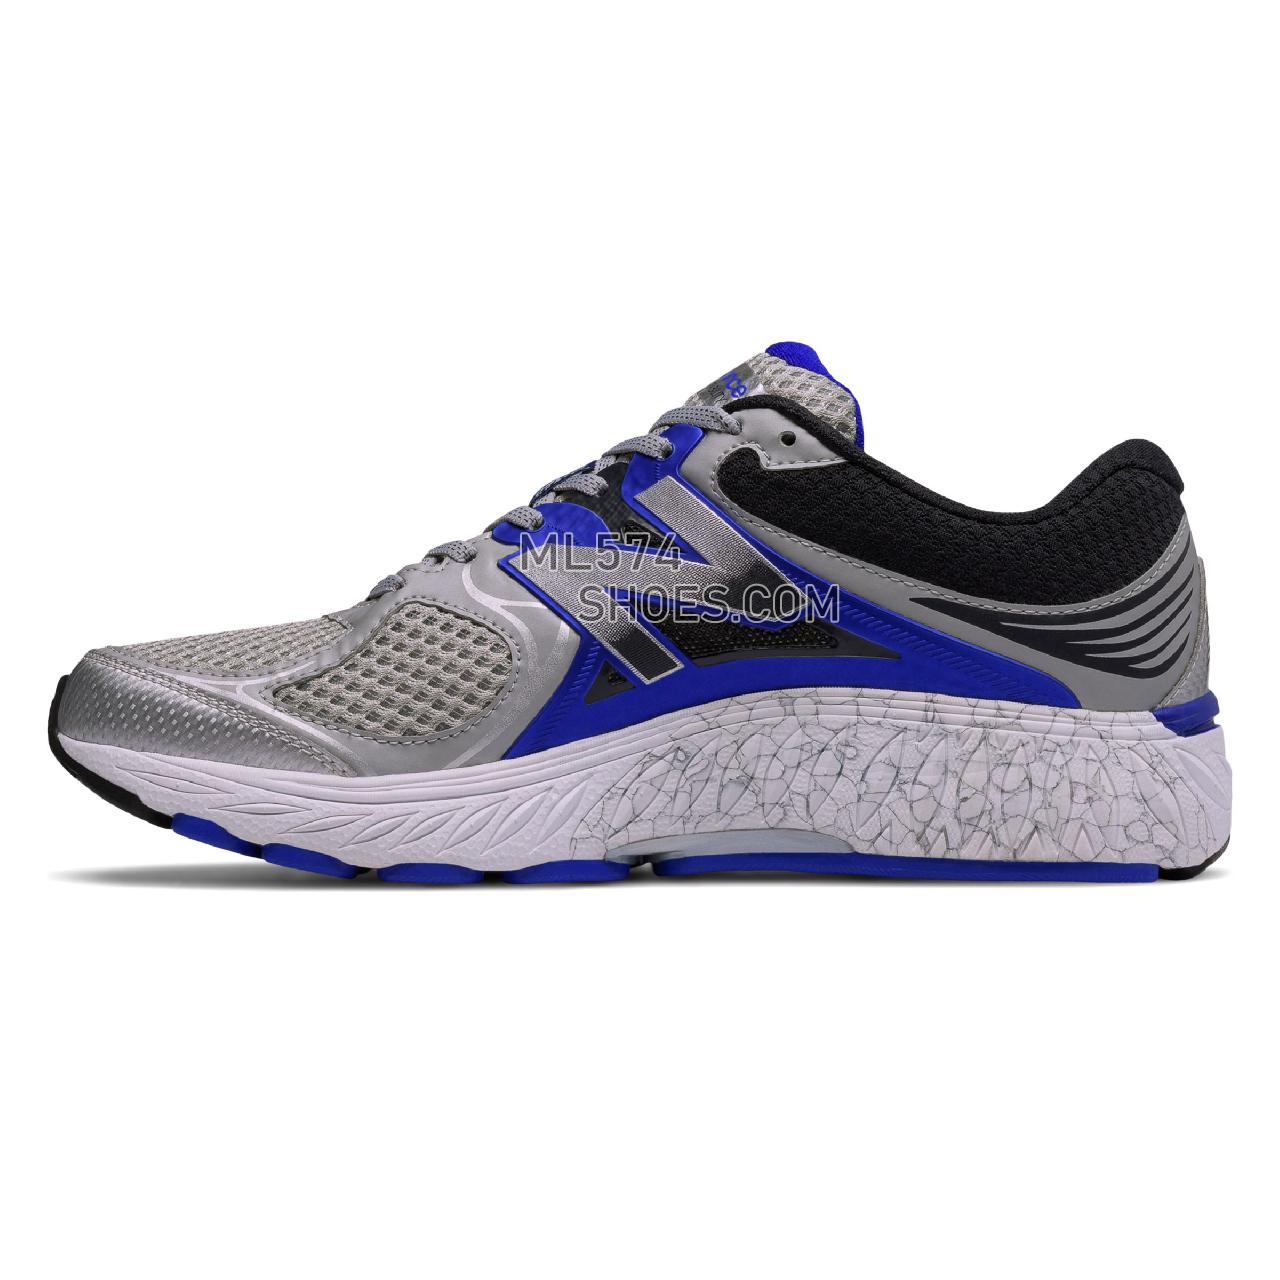 New Balance 940v3 - Men's 940 - Running Silver with Blue and Black - M940SB3